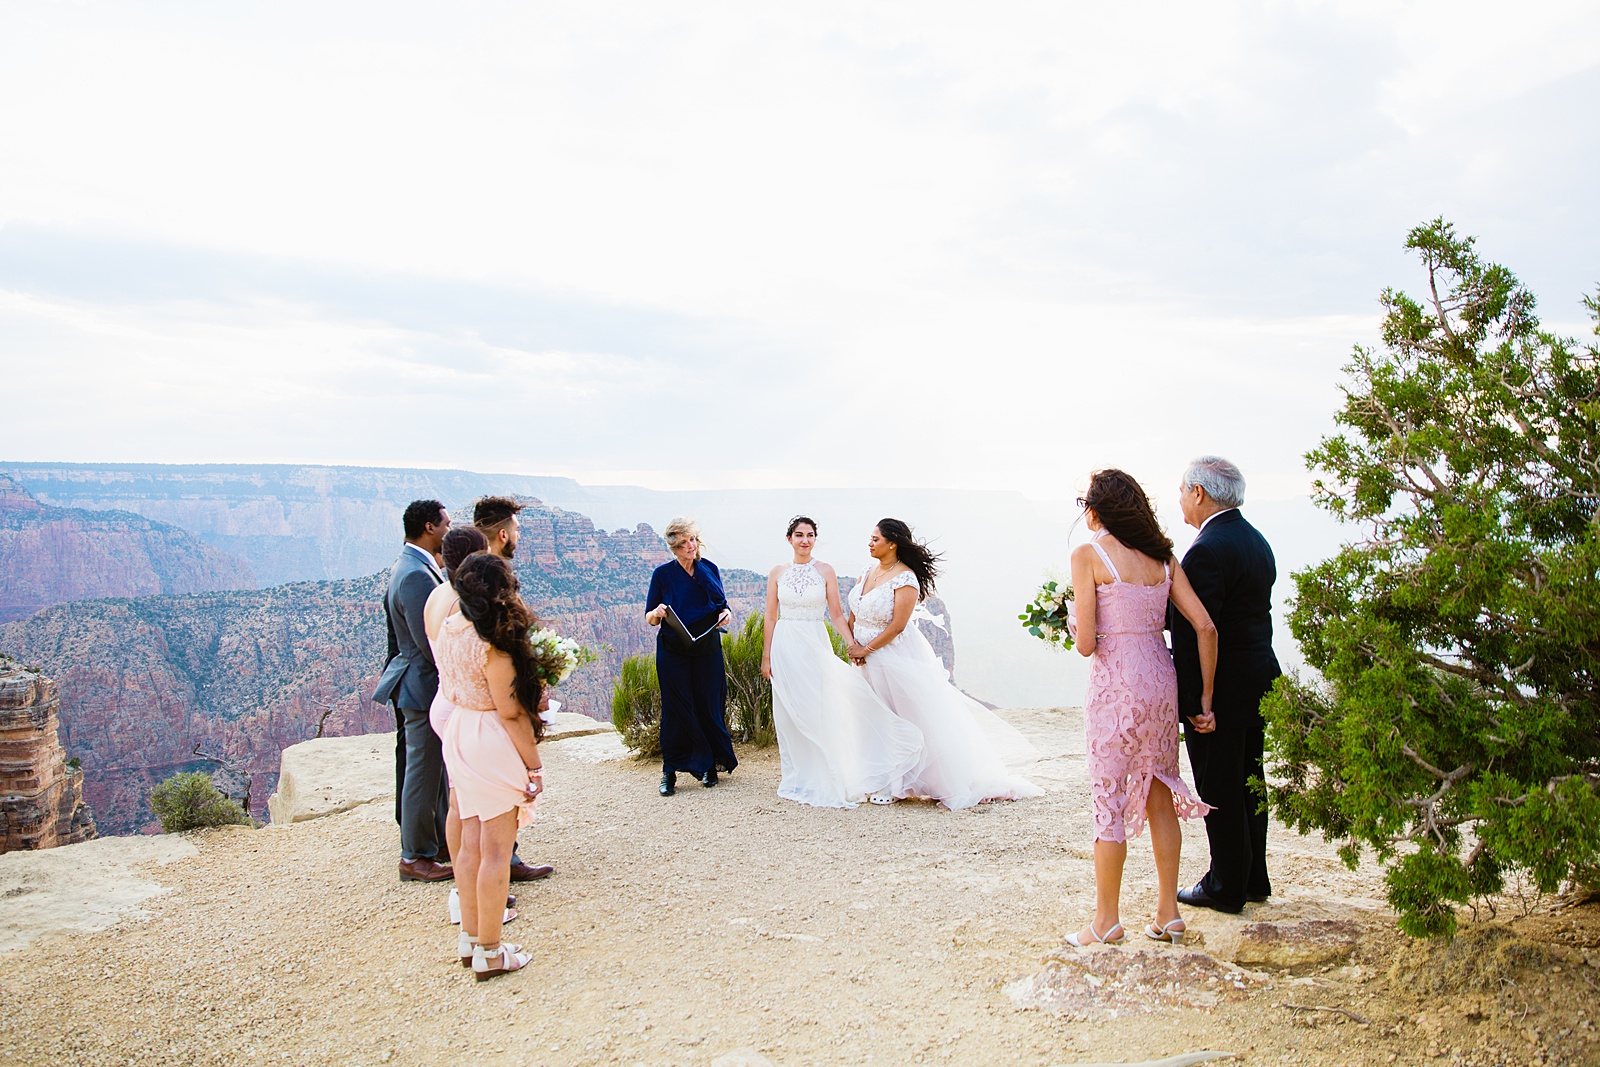 Brides looking at their guests during their wedding ceremony at their Grand Canyon elopement by PMA Photography.